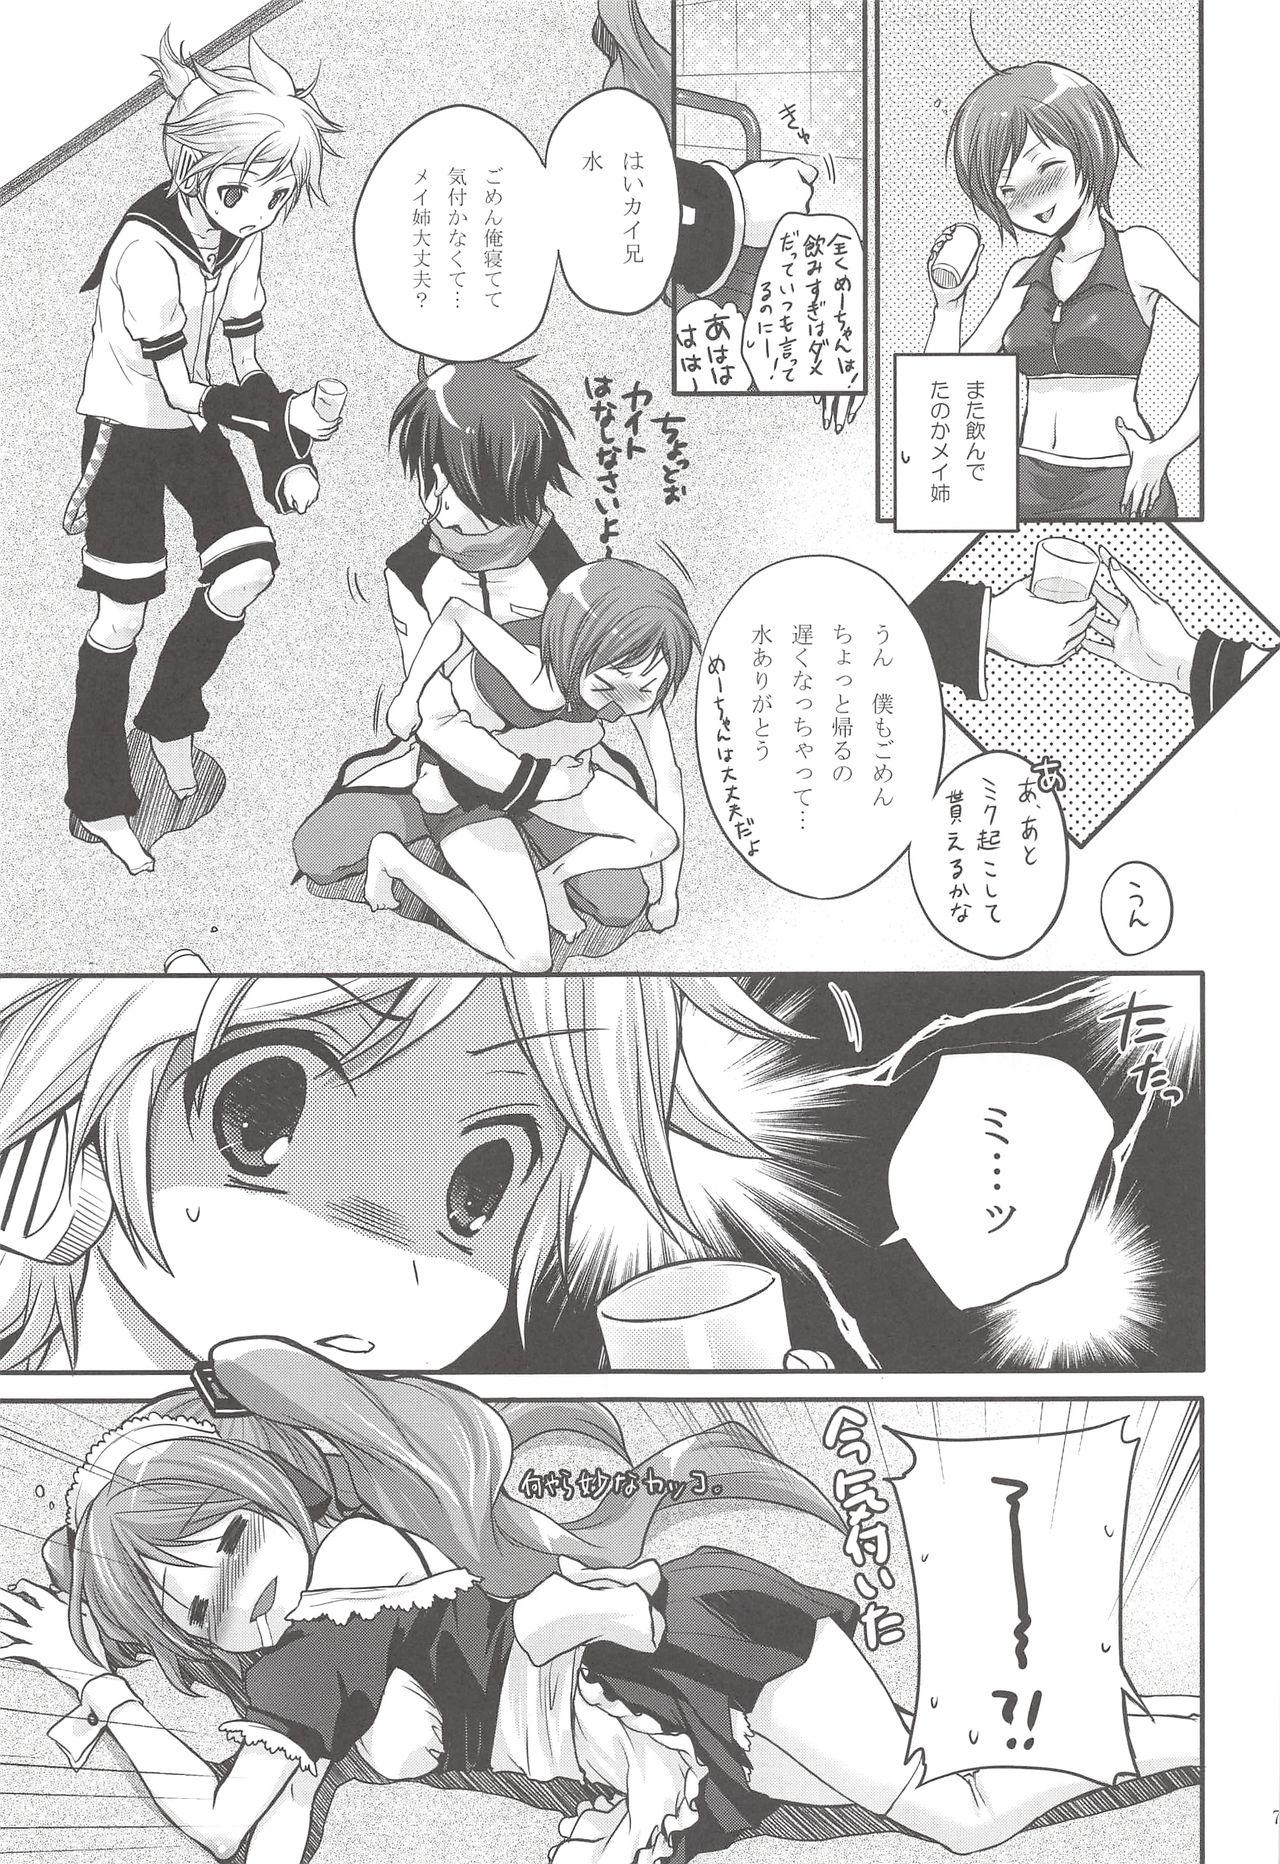 Orgia I serve domine - Vocaloid Groping - Page 6